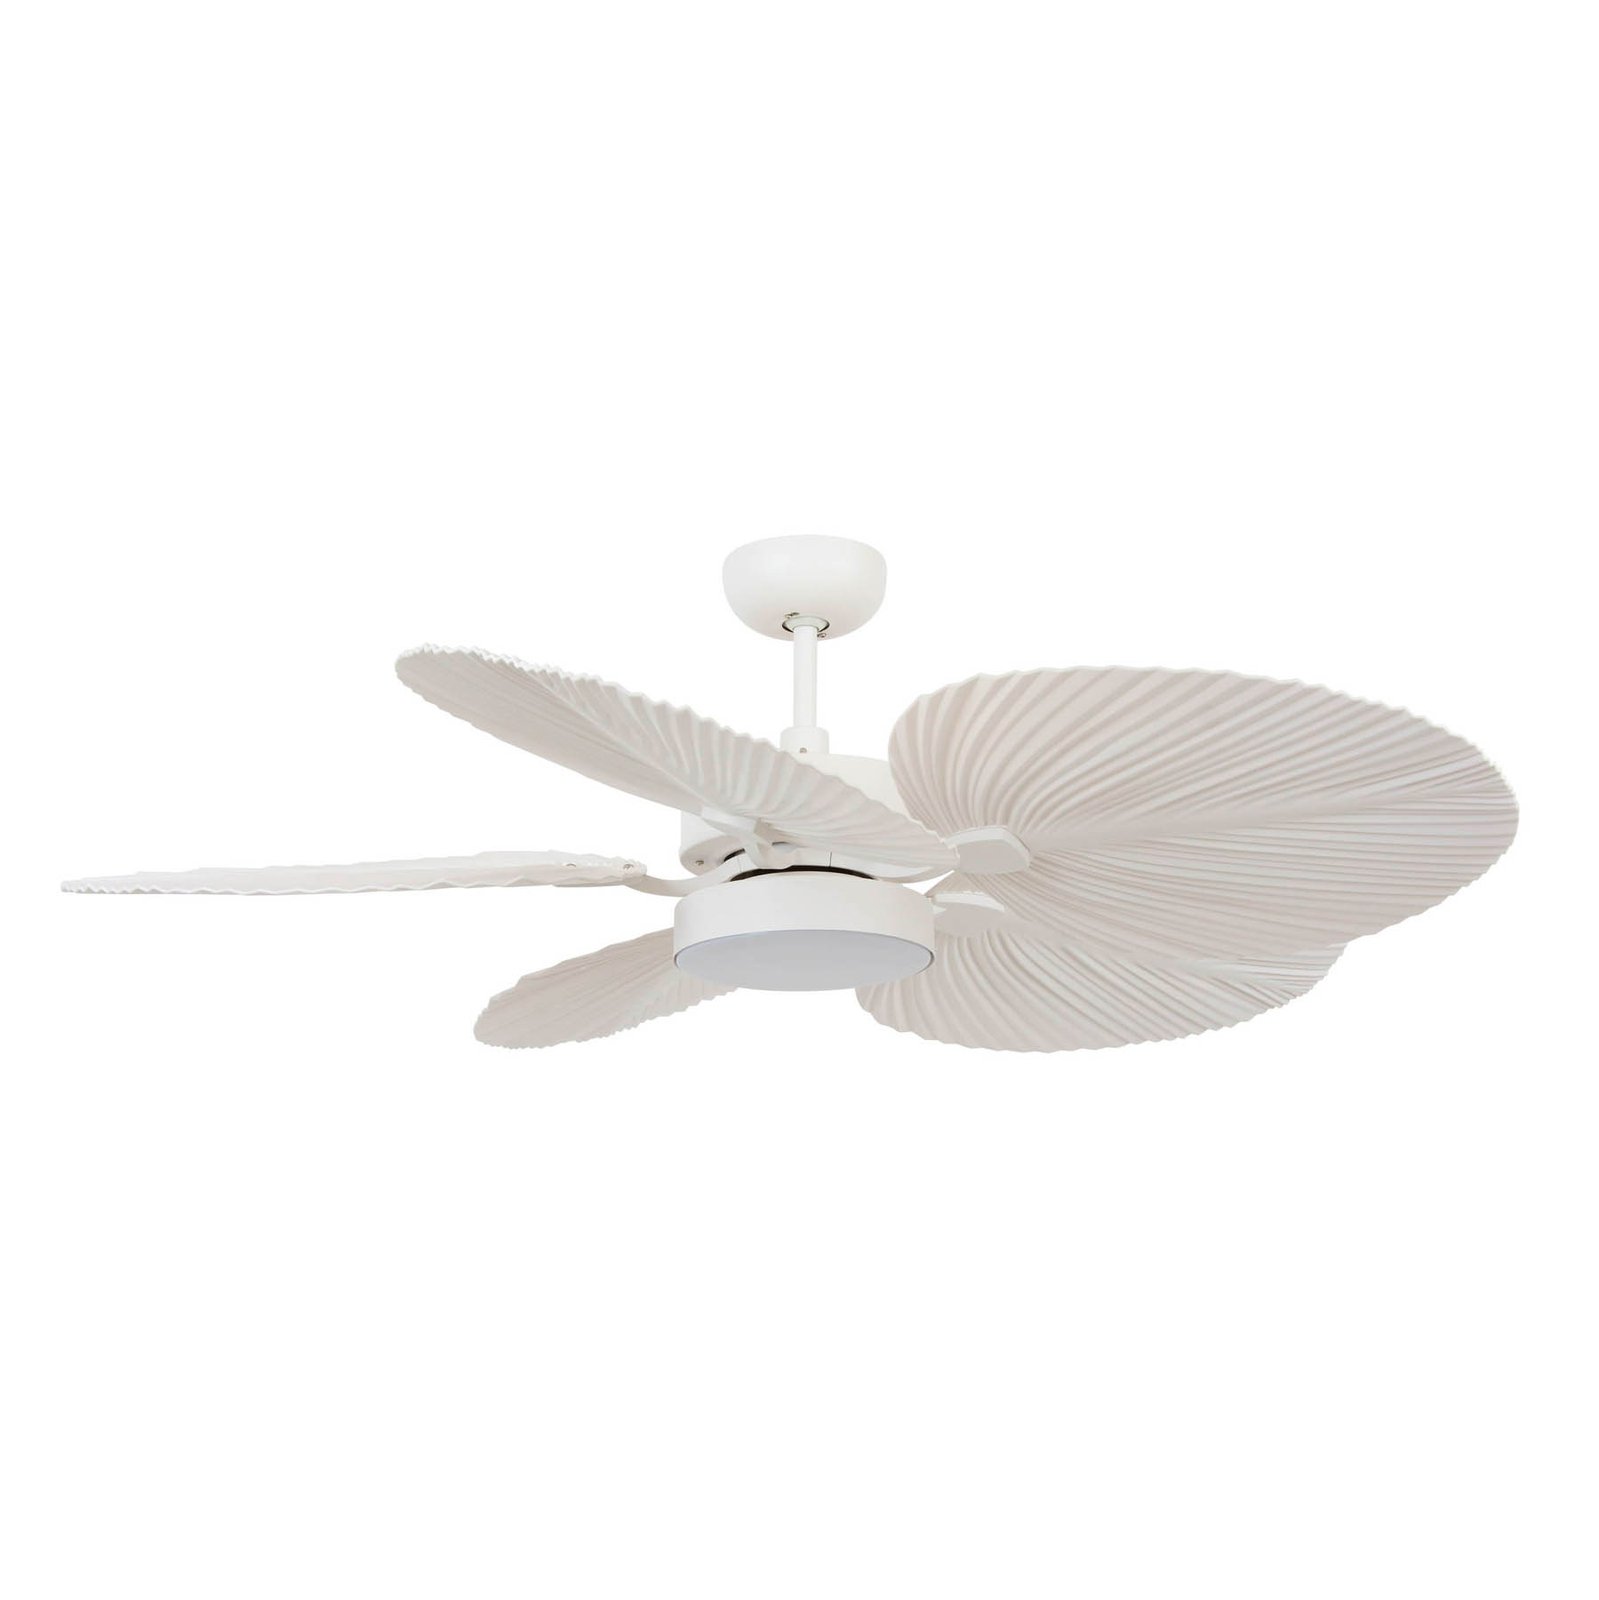 Bali ceiling fan with LED light, white